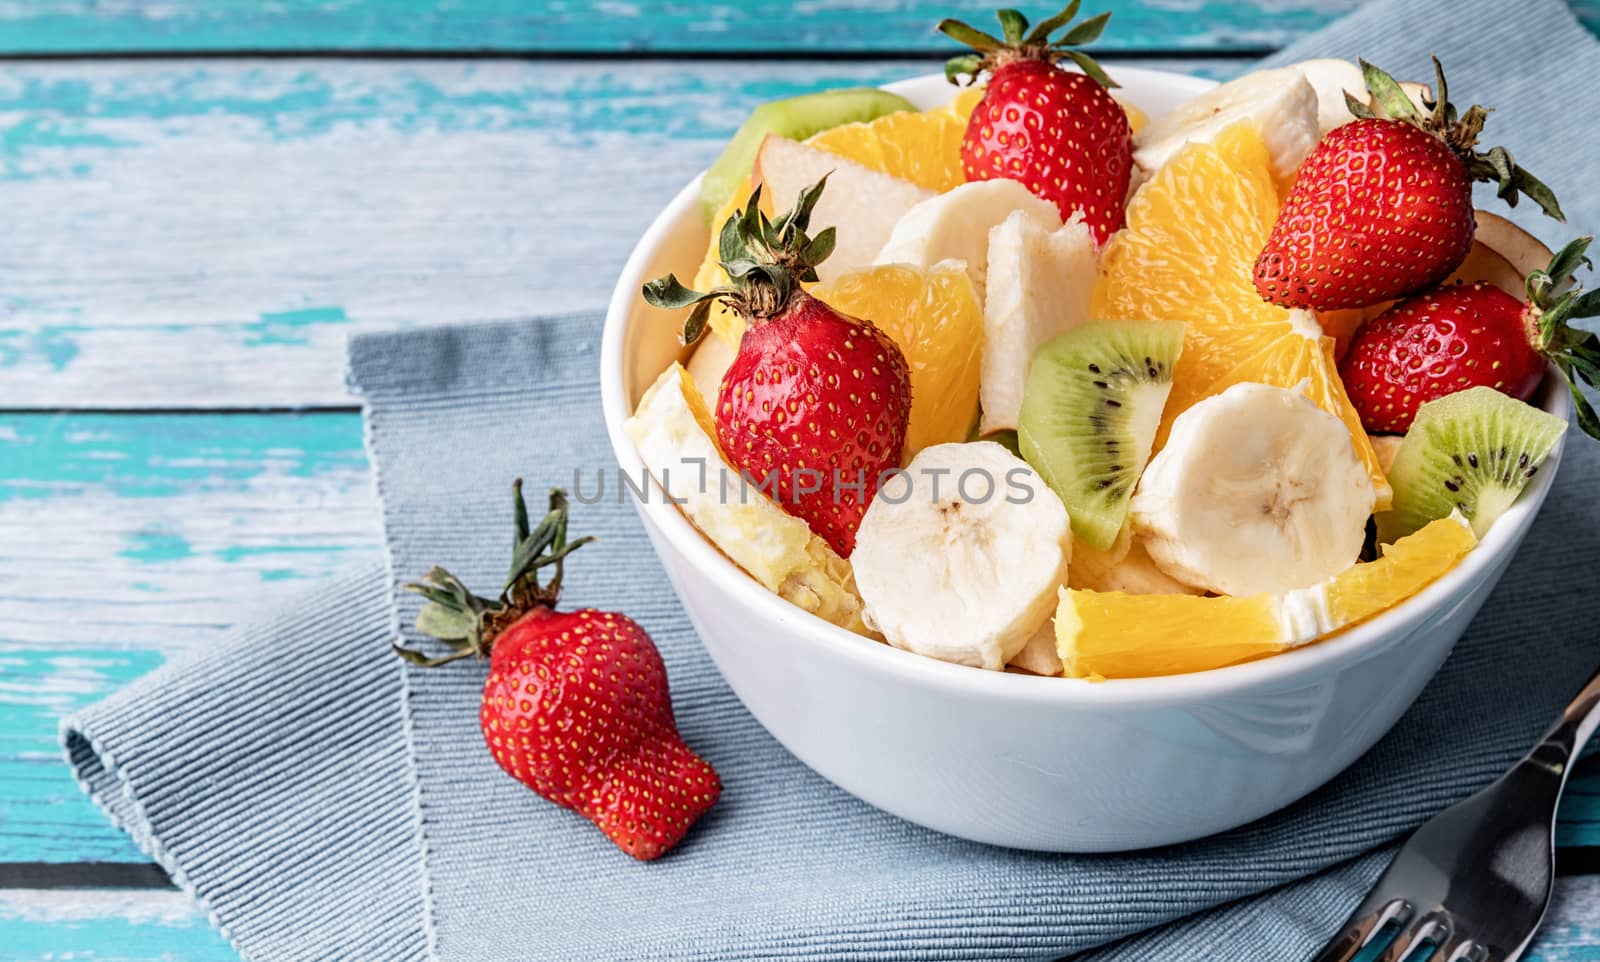 Healthy dieting. Close up of fresh fruit salad on blue wooden background